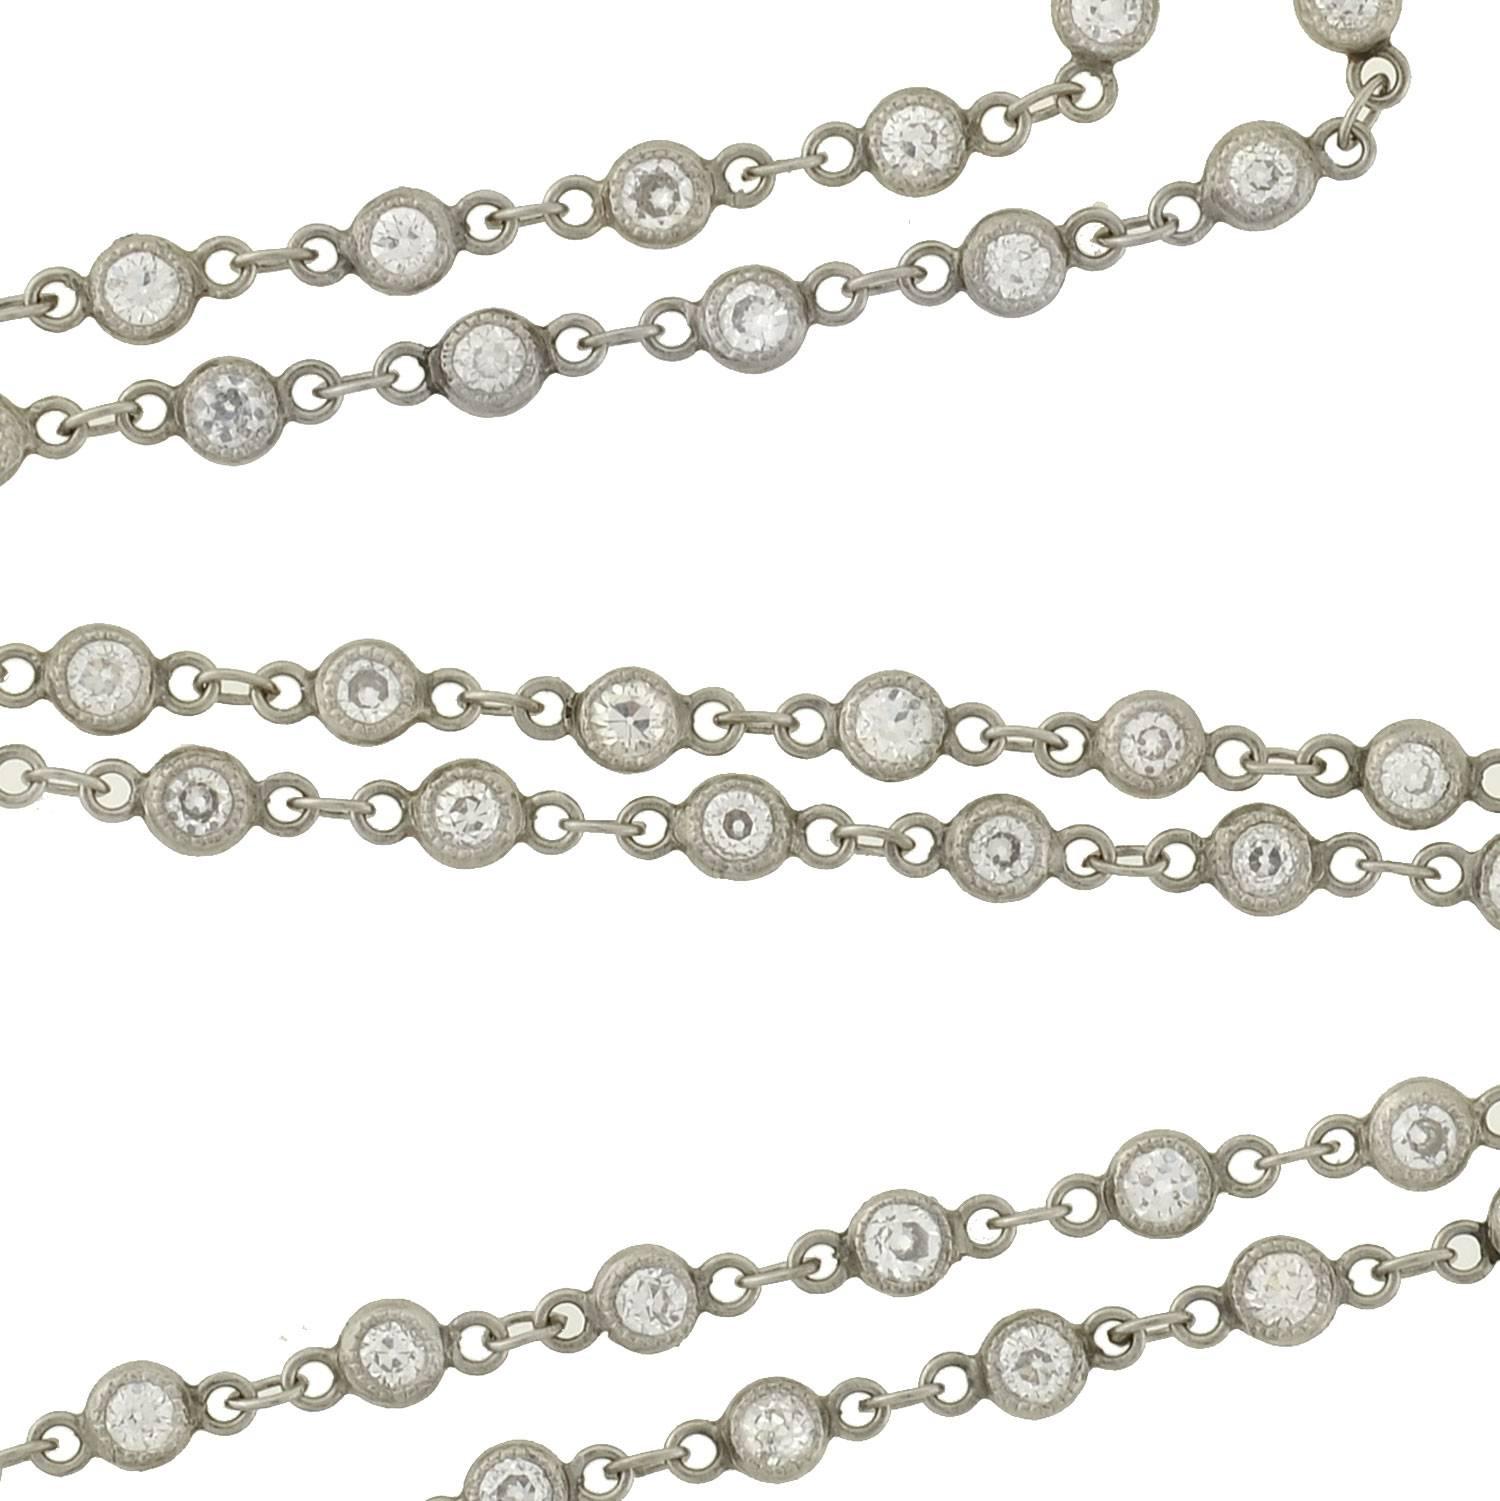 A beautiful diamond necklace from the Edwardian (ca1910) era! Crafted in platinum, the necklace is comprised of delicate diamond links that form a fine, flowing chain. Each diamond is set in a milgrained bezel, and is connected with delicate